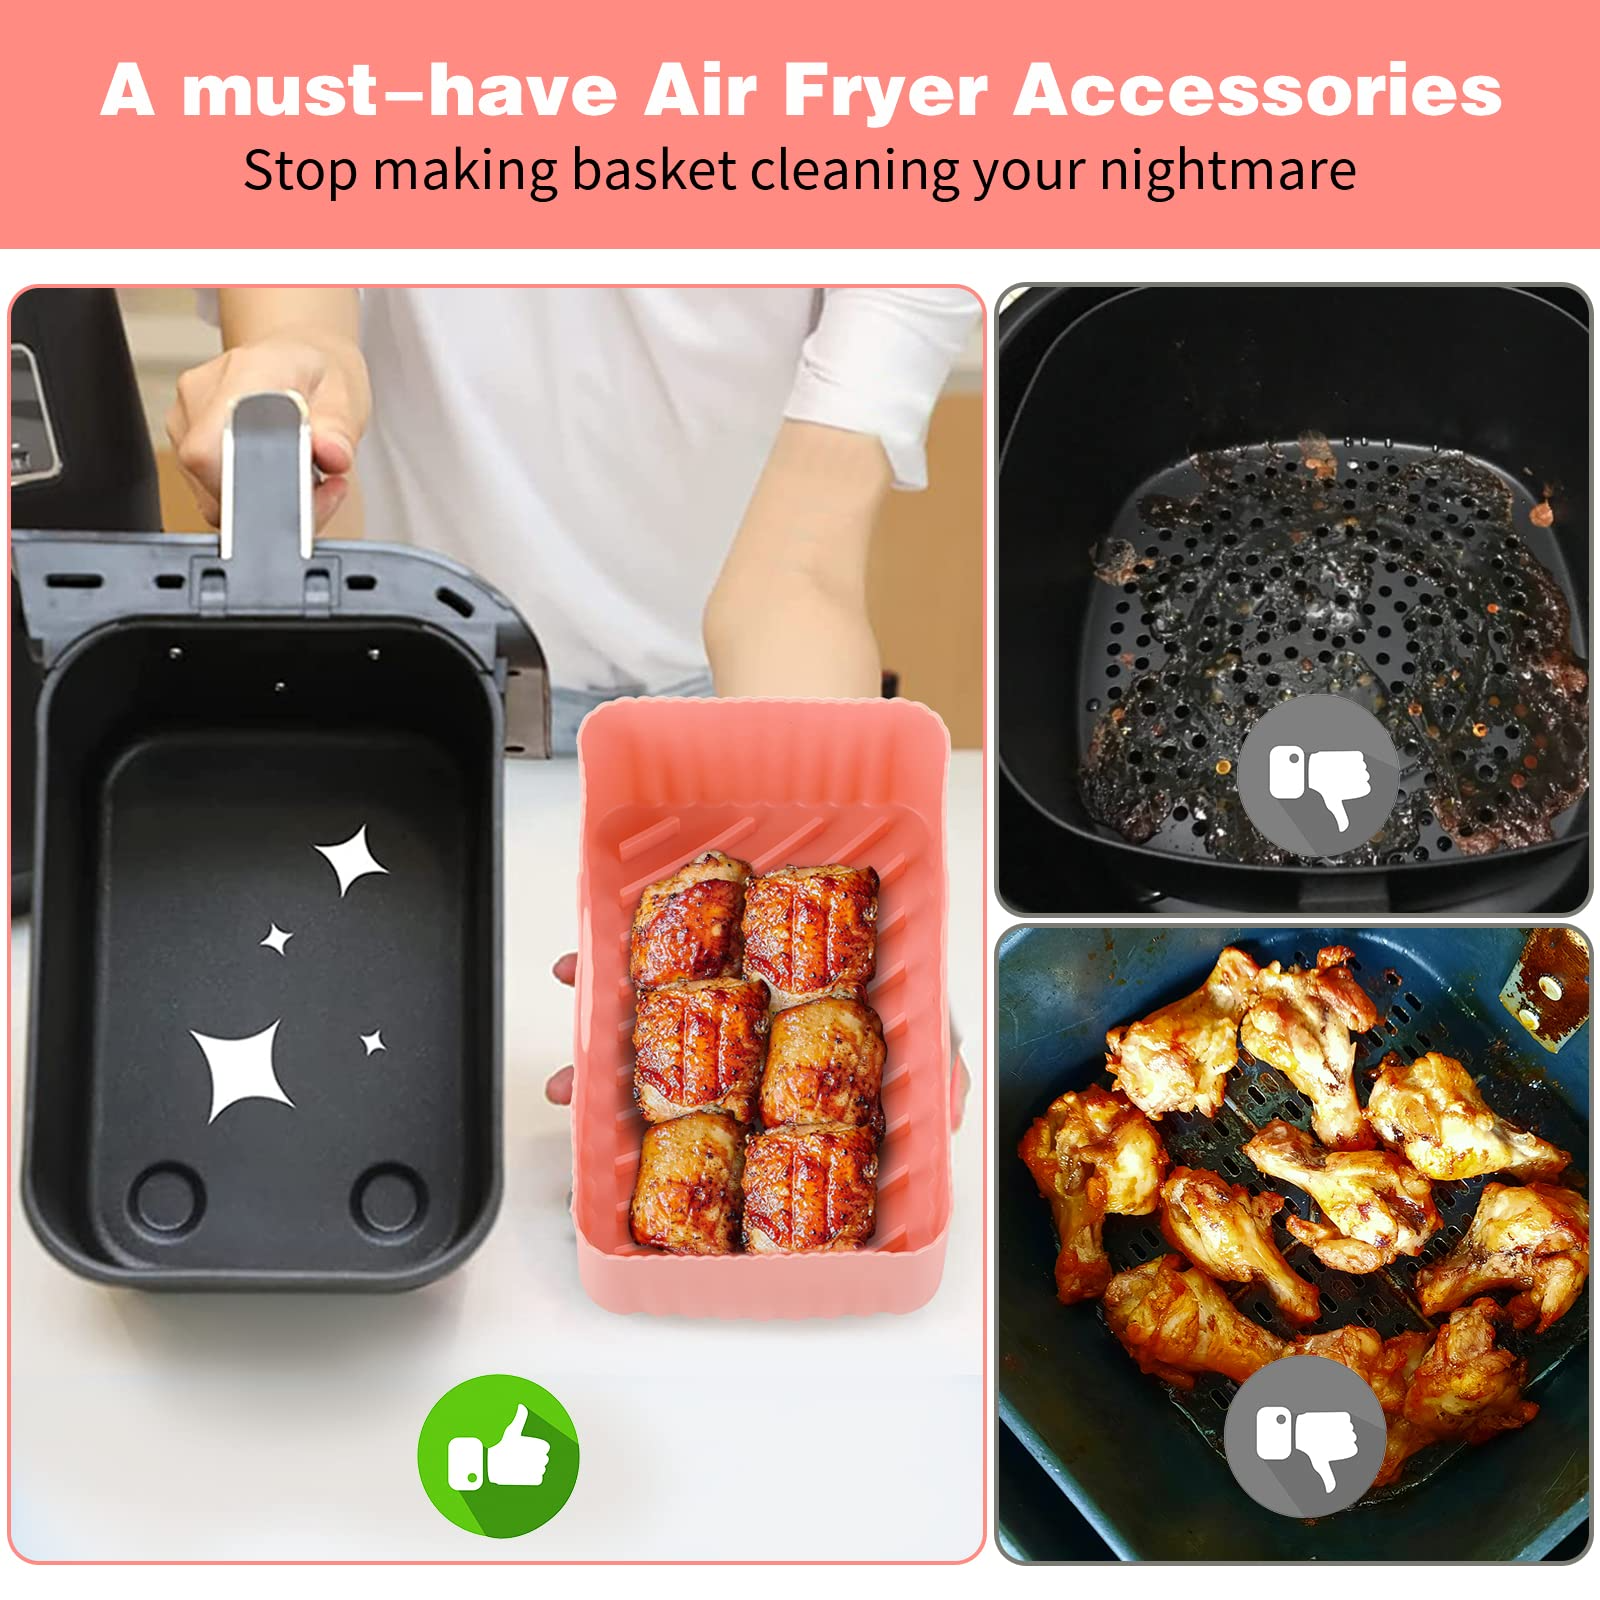 Lieonvis Air Fryer Silicone Pot,Reusable Silicone Air Fryer Liner for 8qt Double Basket Aair Fryer.It Is Compatible with Ninja Brand Dz201,dz401